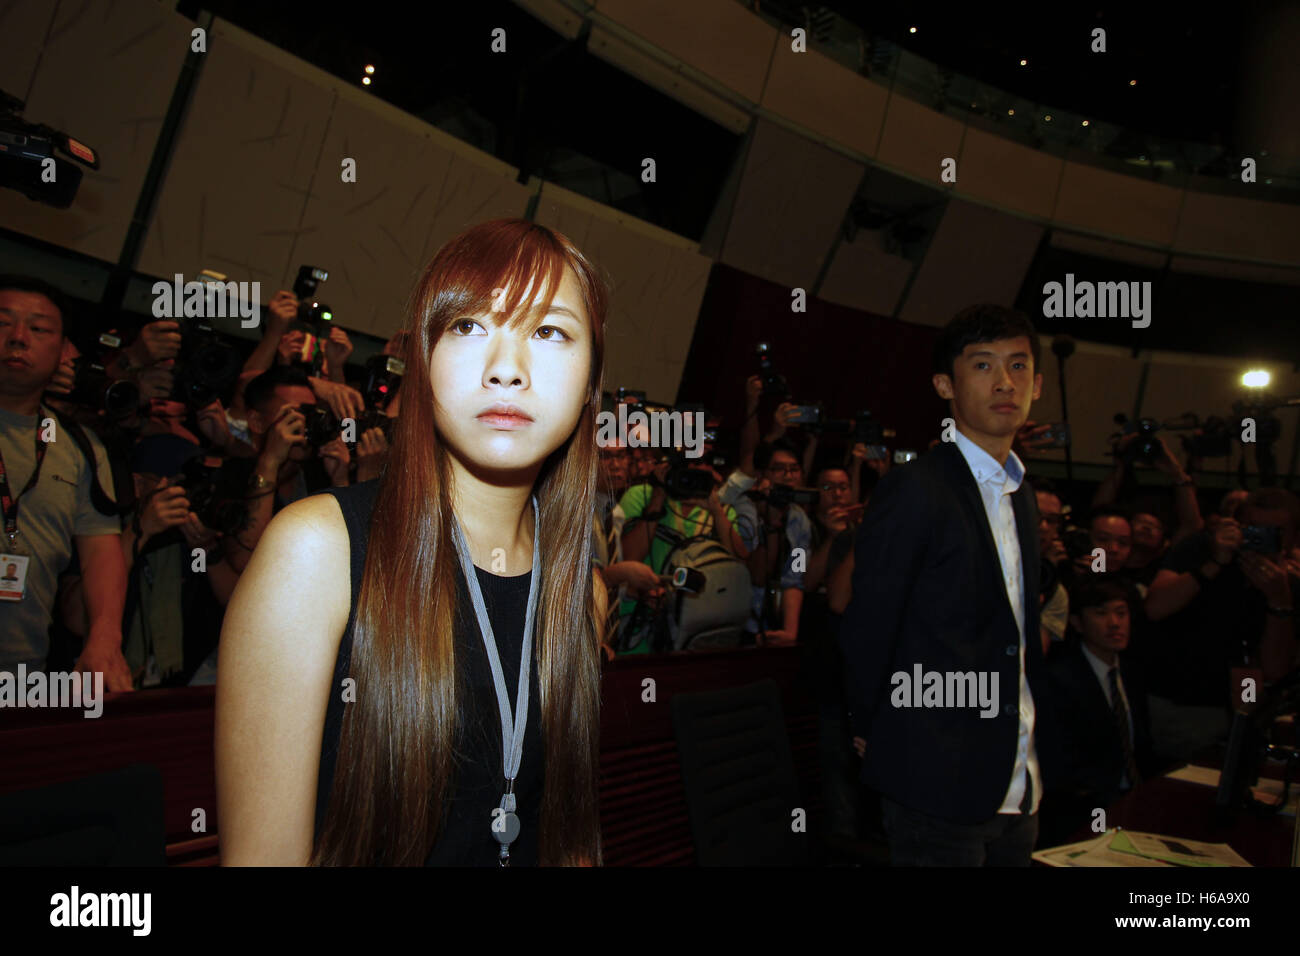 October 26, 2016 - Elected candidate of pro-independence political party YOUNGSPIRATION, Yau Wai-ching ( L ), and Sixtus Leung ( R ) pose for the media inside Hong Kong LEGICO Chamber staging a protest demanding for a second sworn-in. Council is adjourned until further notice temporarily denying Leung and Yau to proceed for second sworn-in. Oct 26, 2016. Hong Kong. Liau Chung Ren/ZUMA © Liau Chung Ren/ZUMA Wire/Alamy Live News Stock Photo